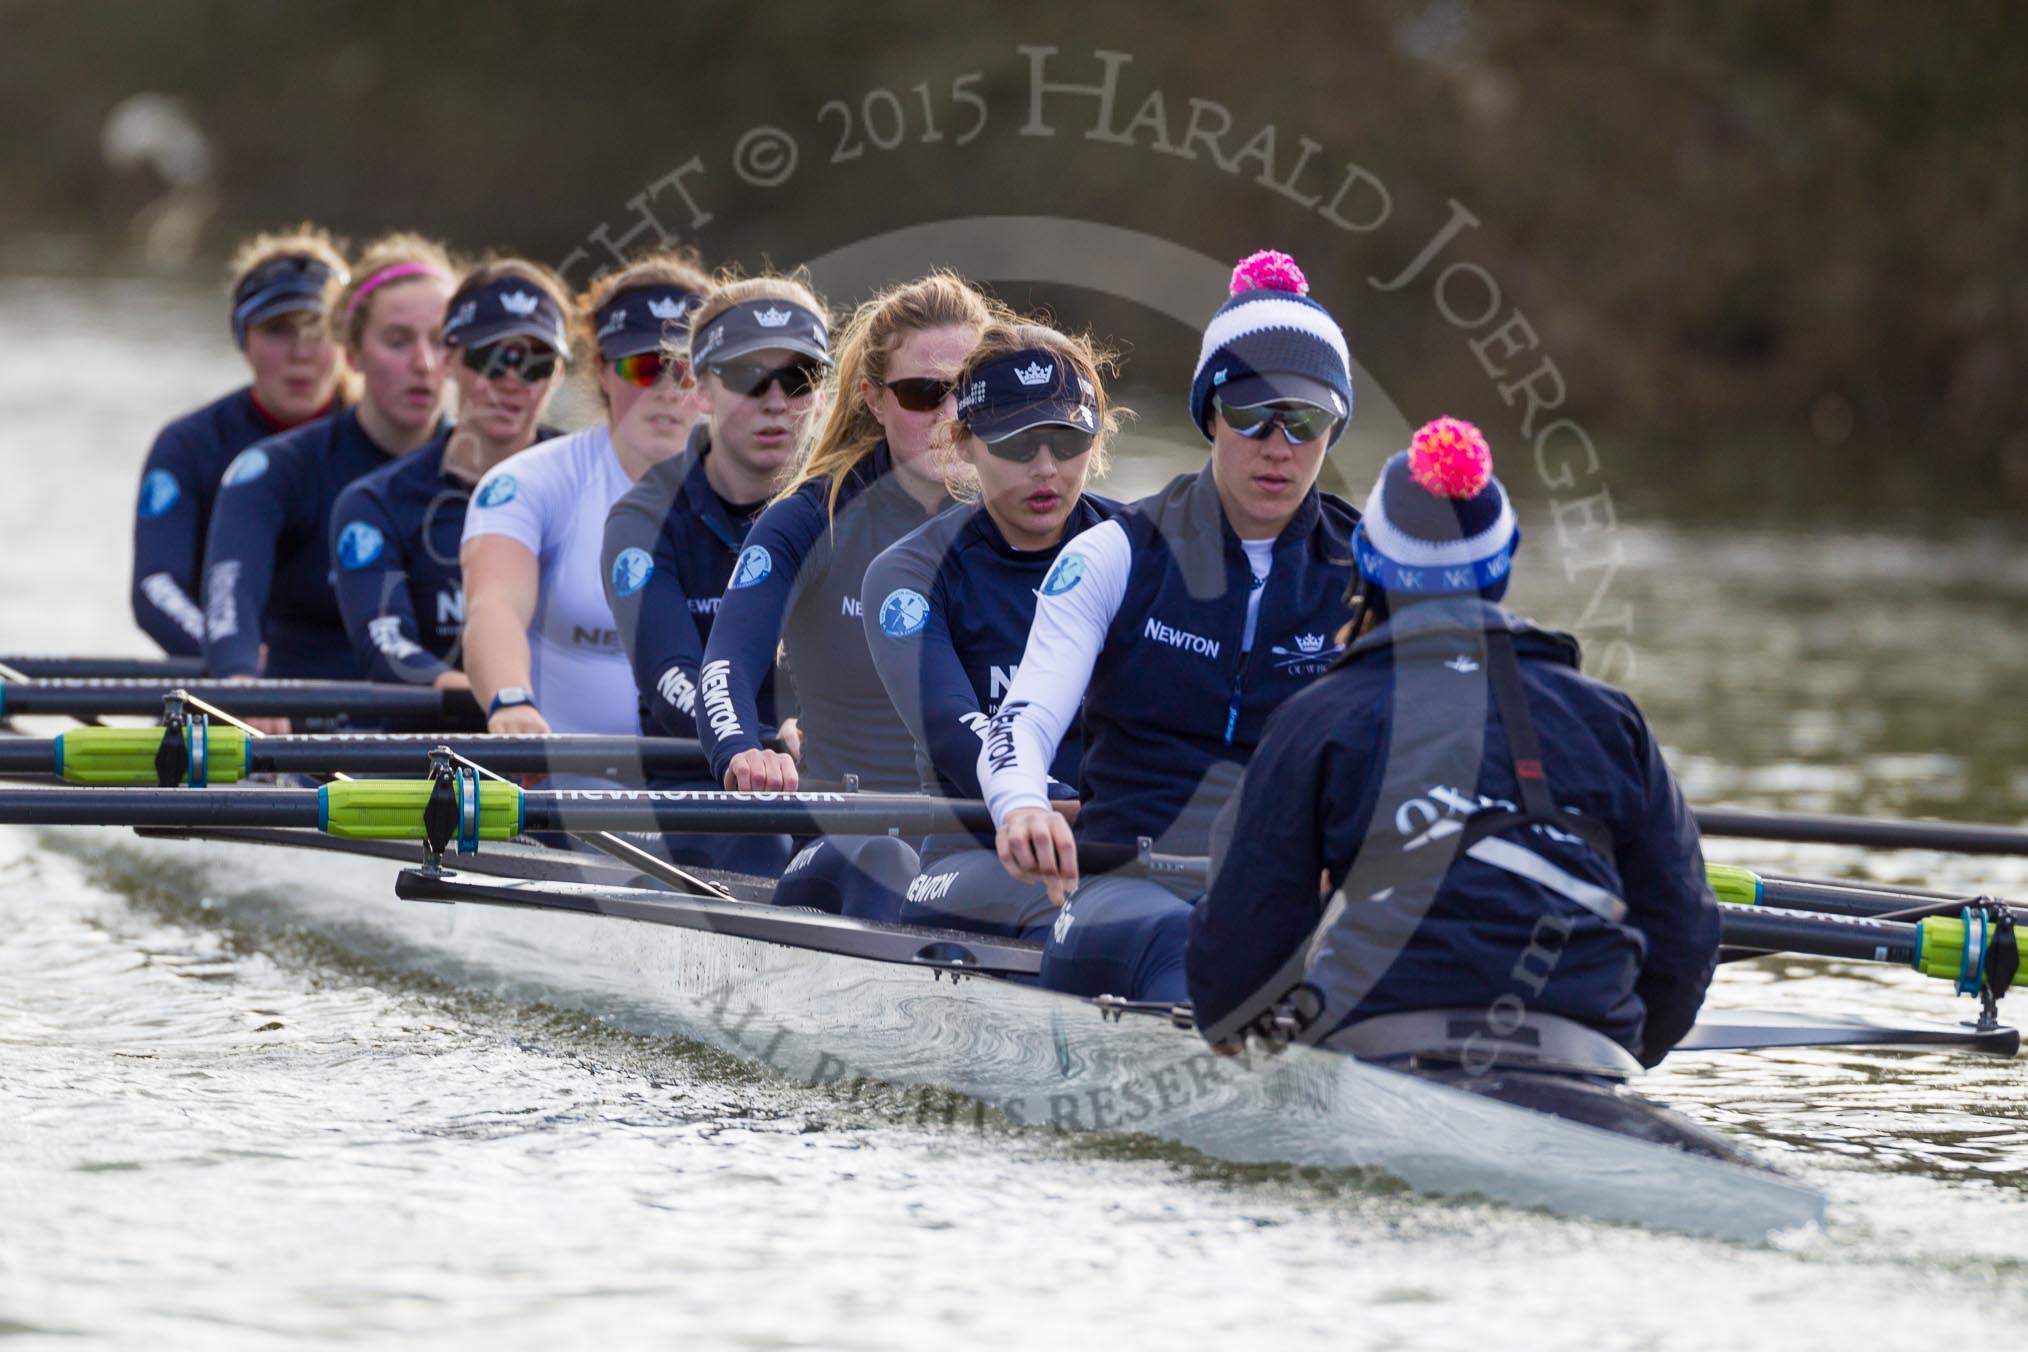 The Boat Race season 2015: OUWBC training Wallingford.

Wallingford,

United Kingdom,
on 04 March 2015 at 15:39, image #36